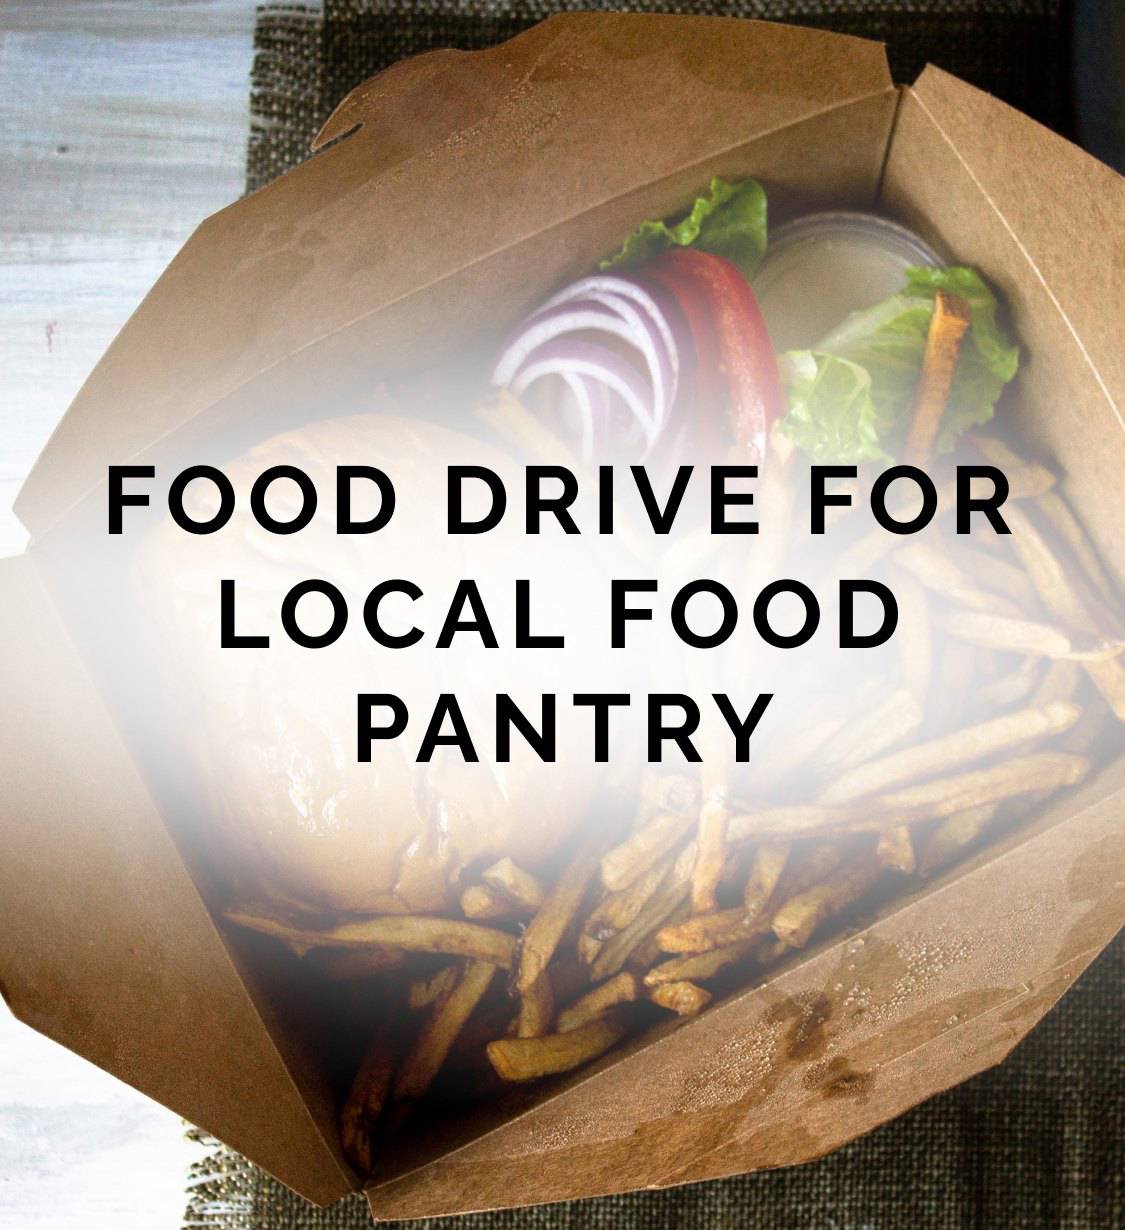 Food Drive for Local Food Pantry